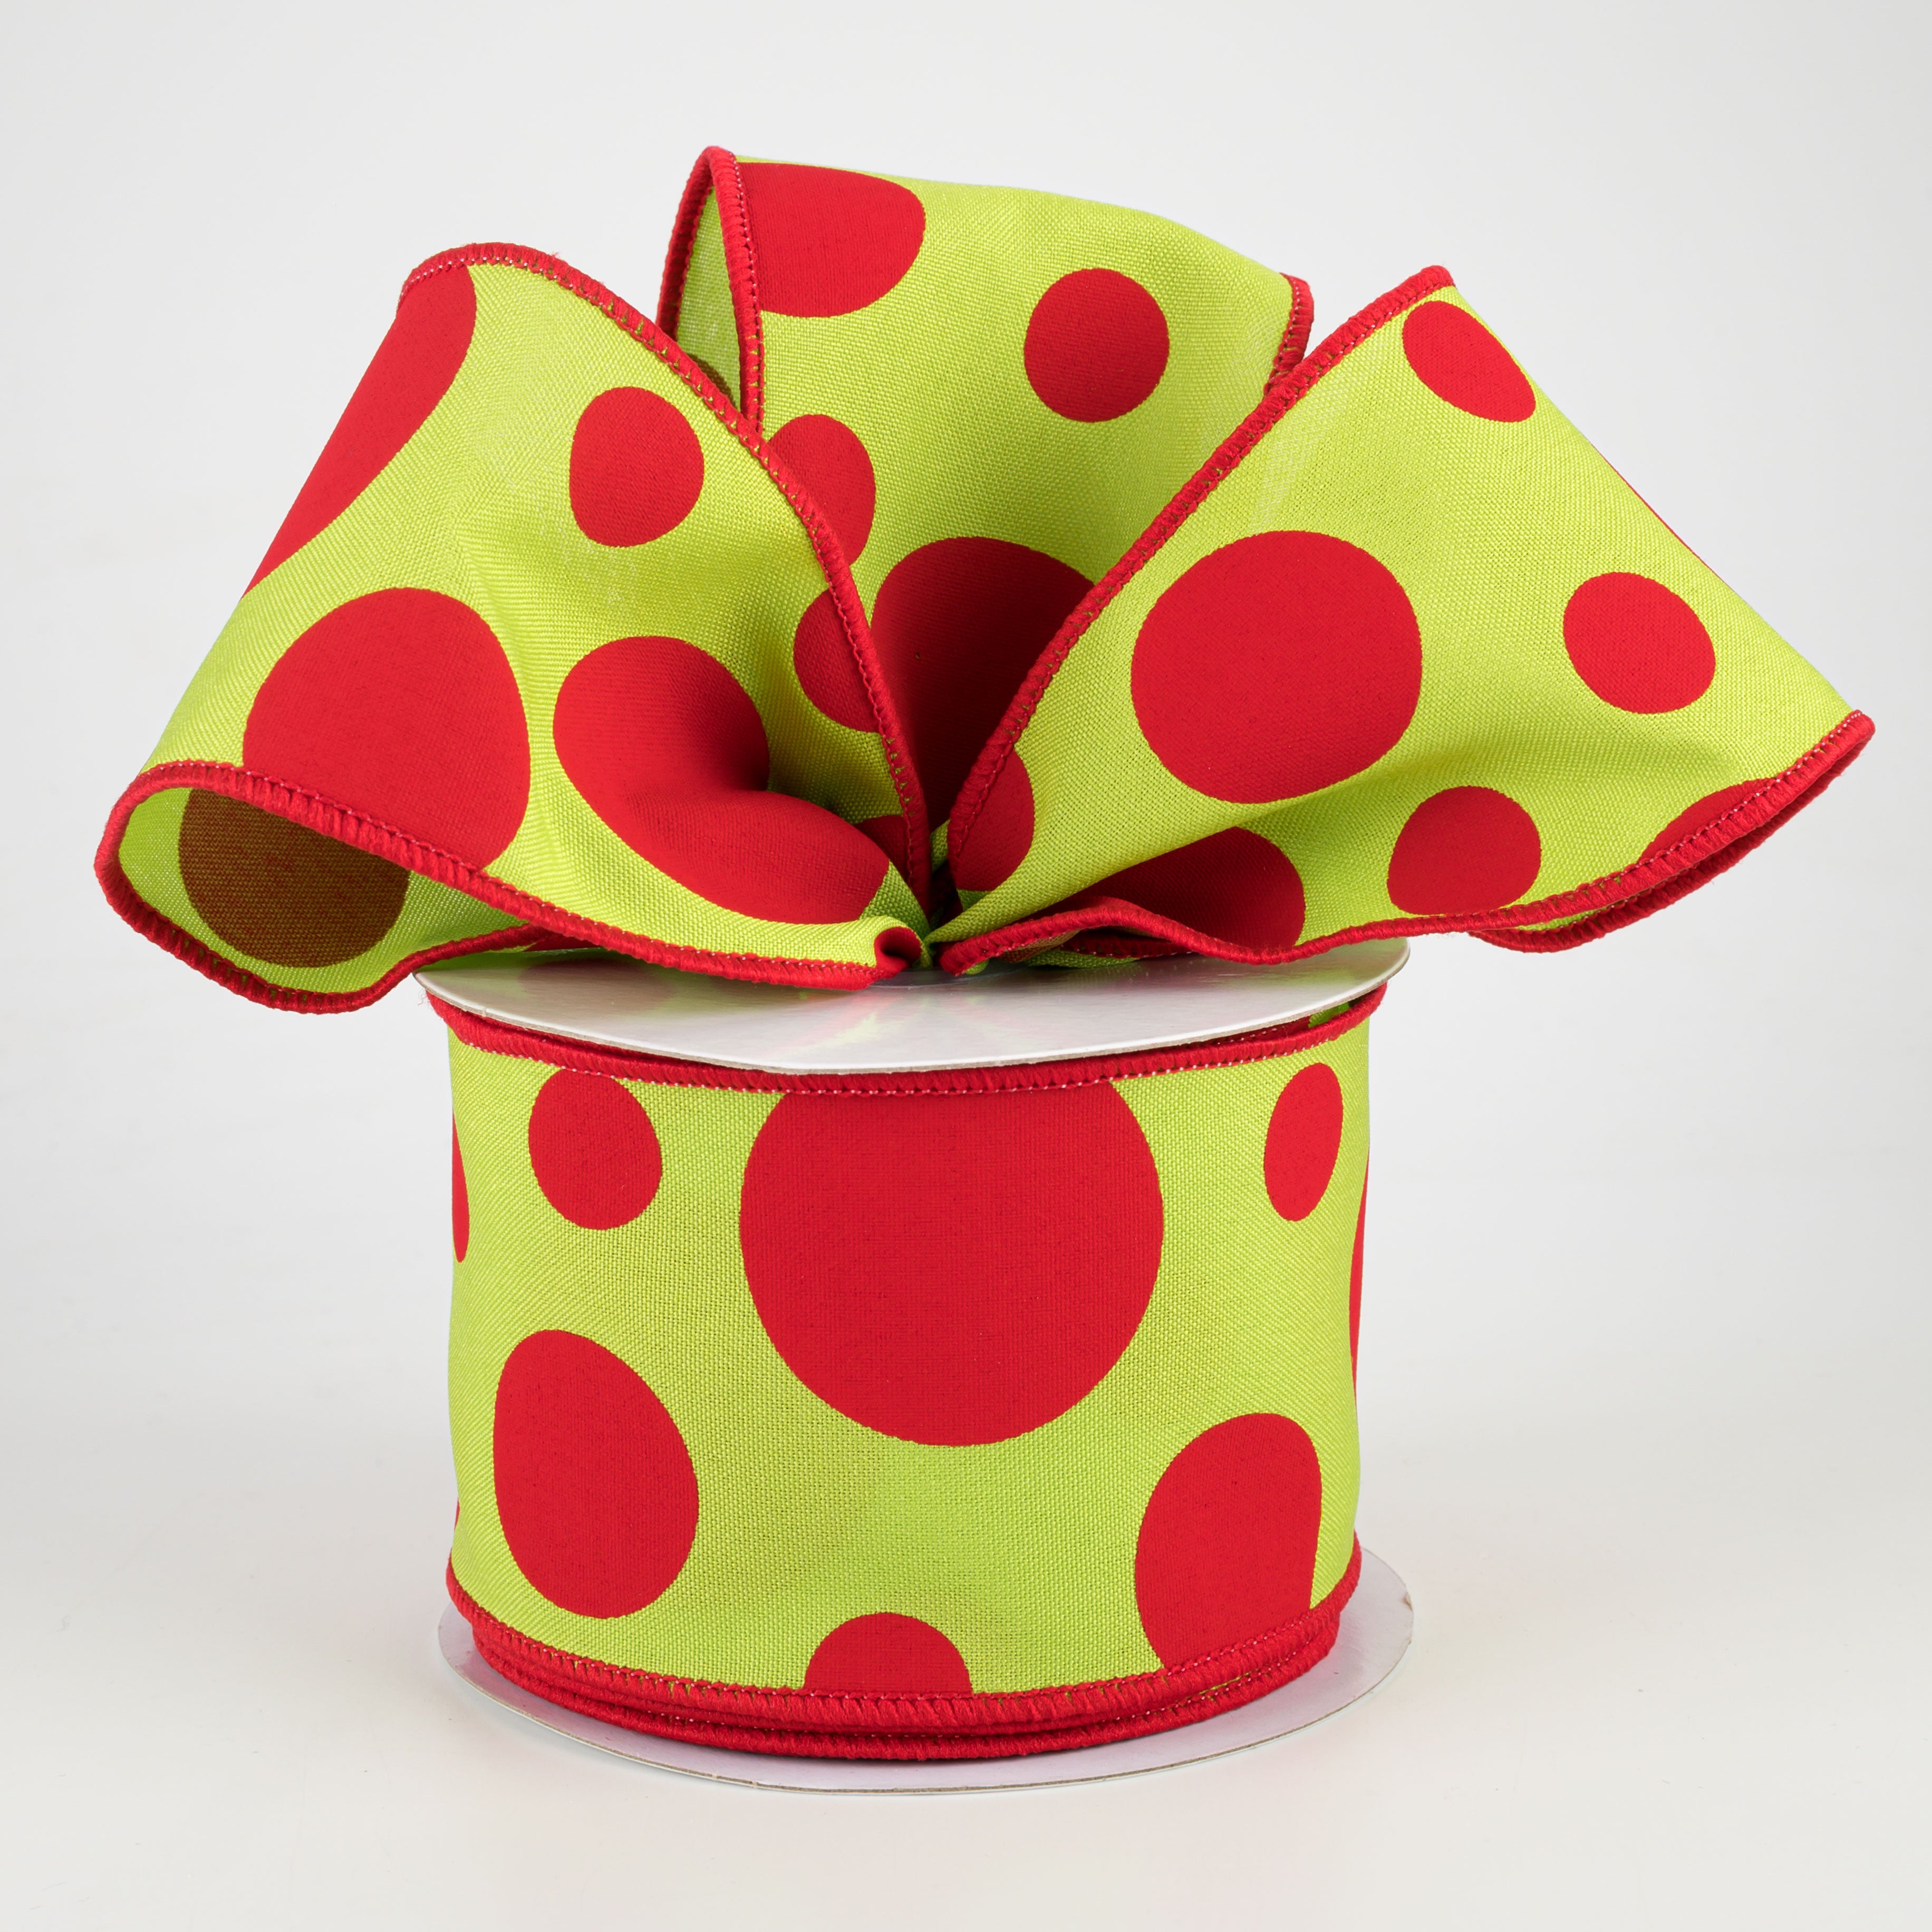 2.5" Giant Three Size Polka Dot Ribbon: Lime Green & Red (10 Yards)